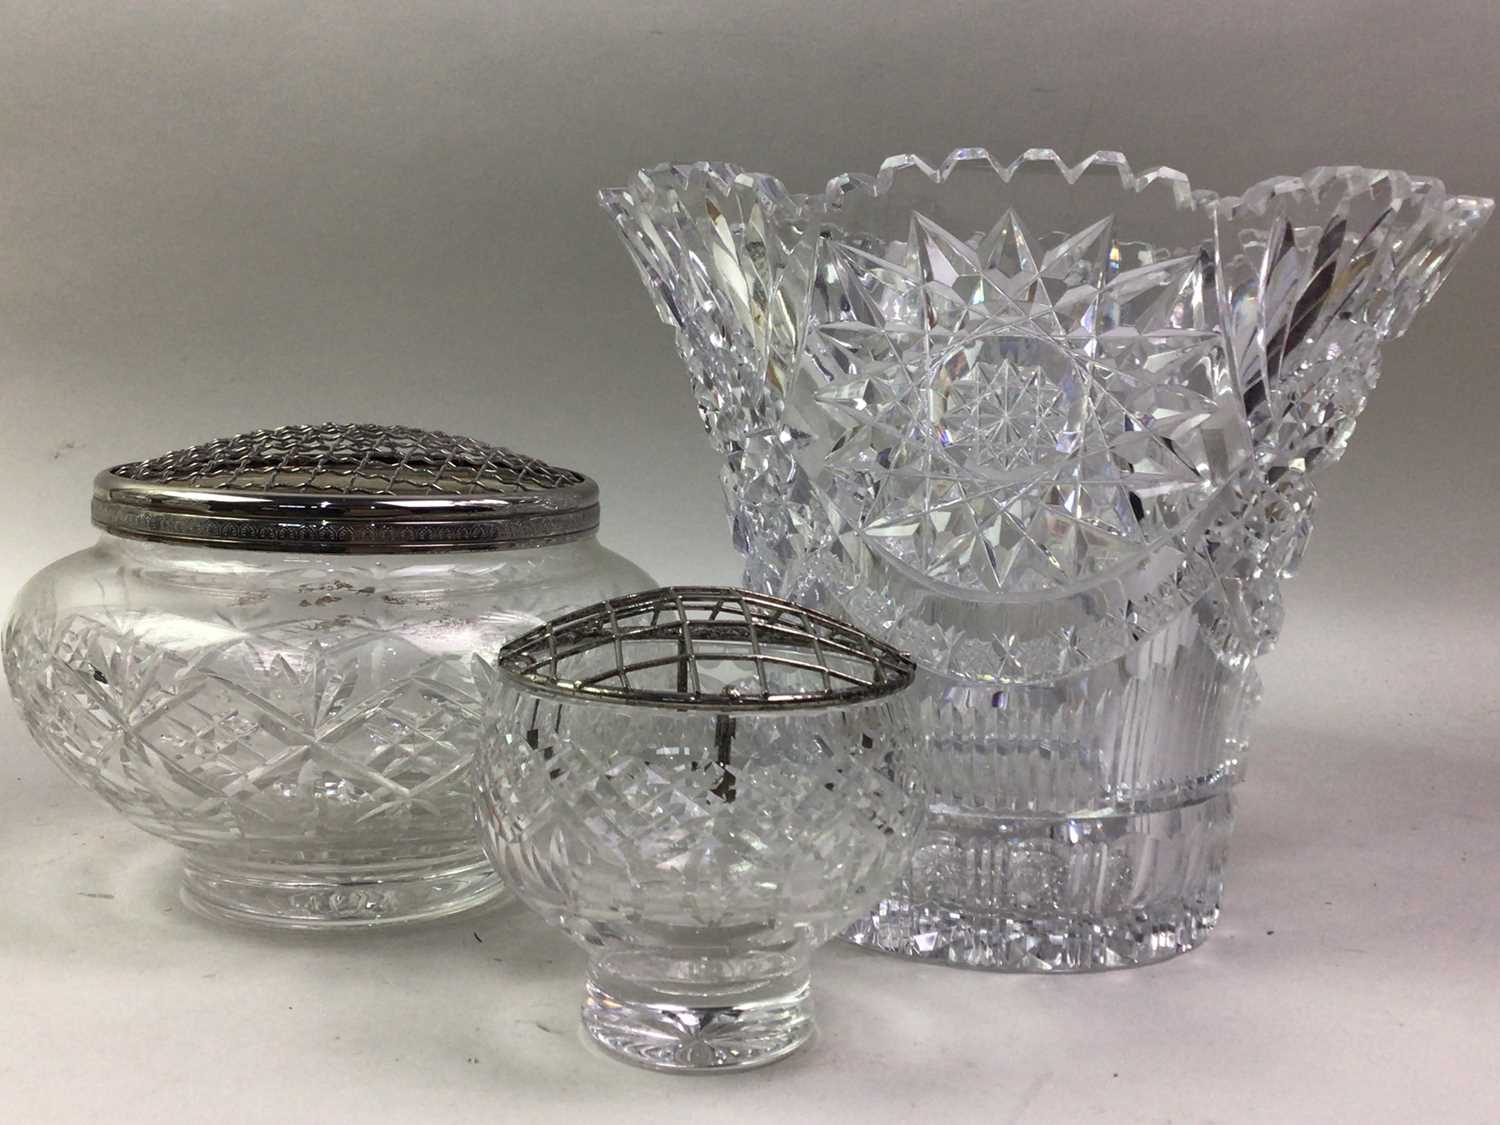 PAIR OF CRYSTAL VASES, ALONG WITH OTHER GLASSWARE - Image 3 of 3